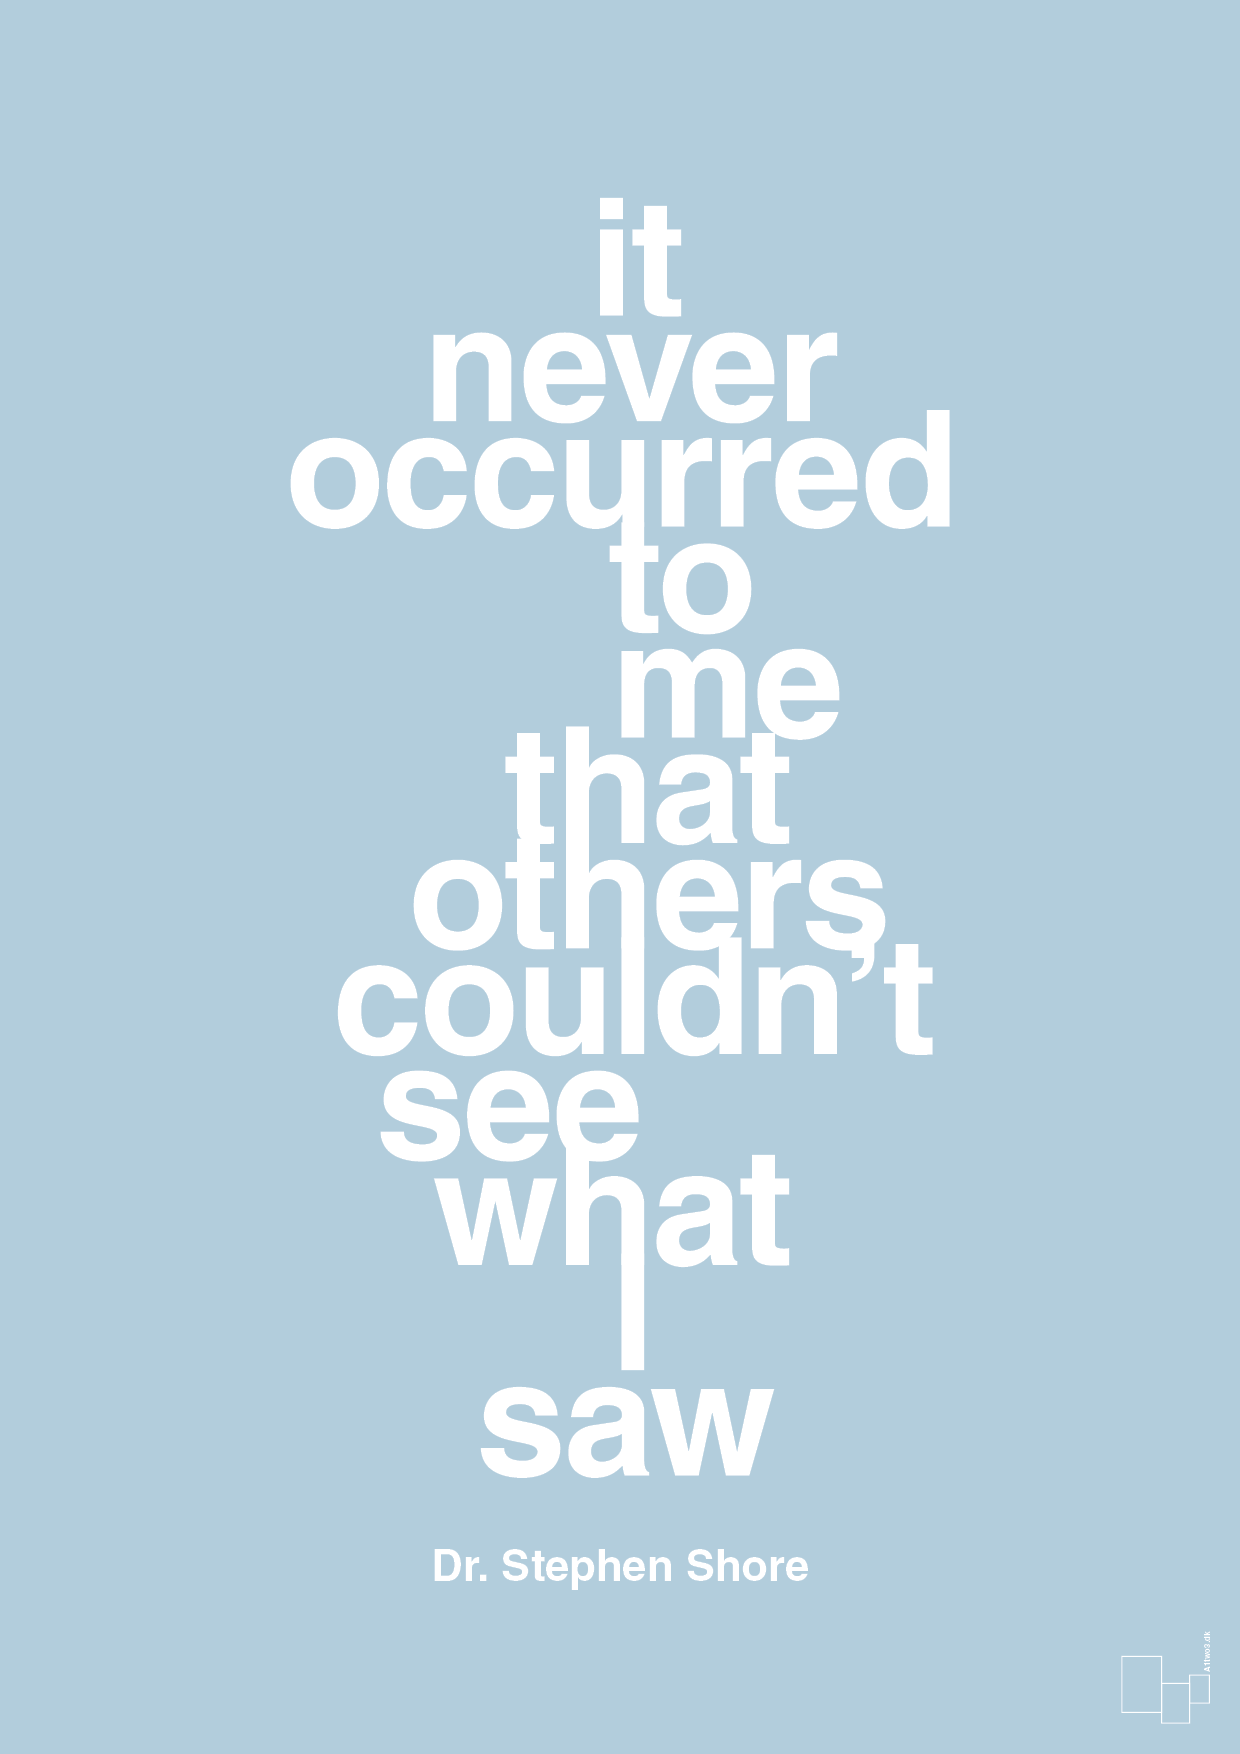 it never occurred to me that others couldn’t see what I saw - Plakat med Samfund i Heavenly Blue